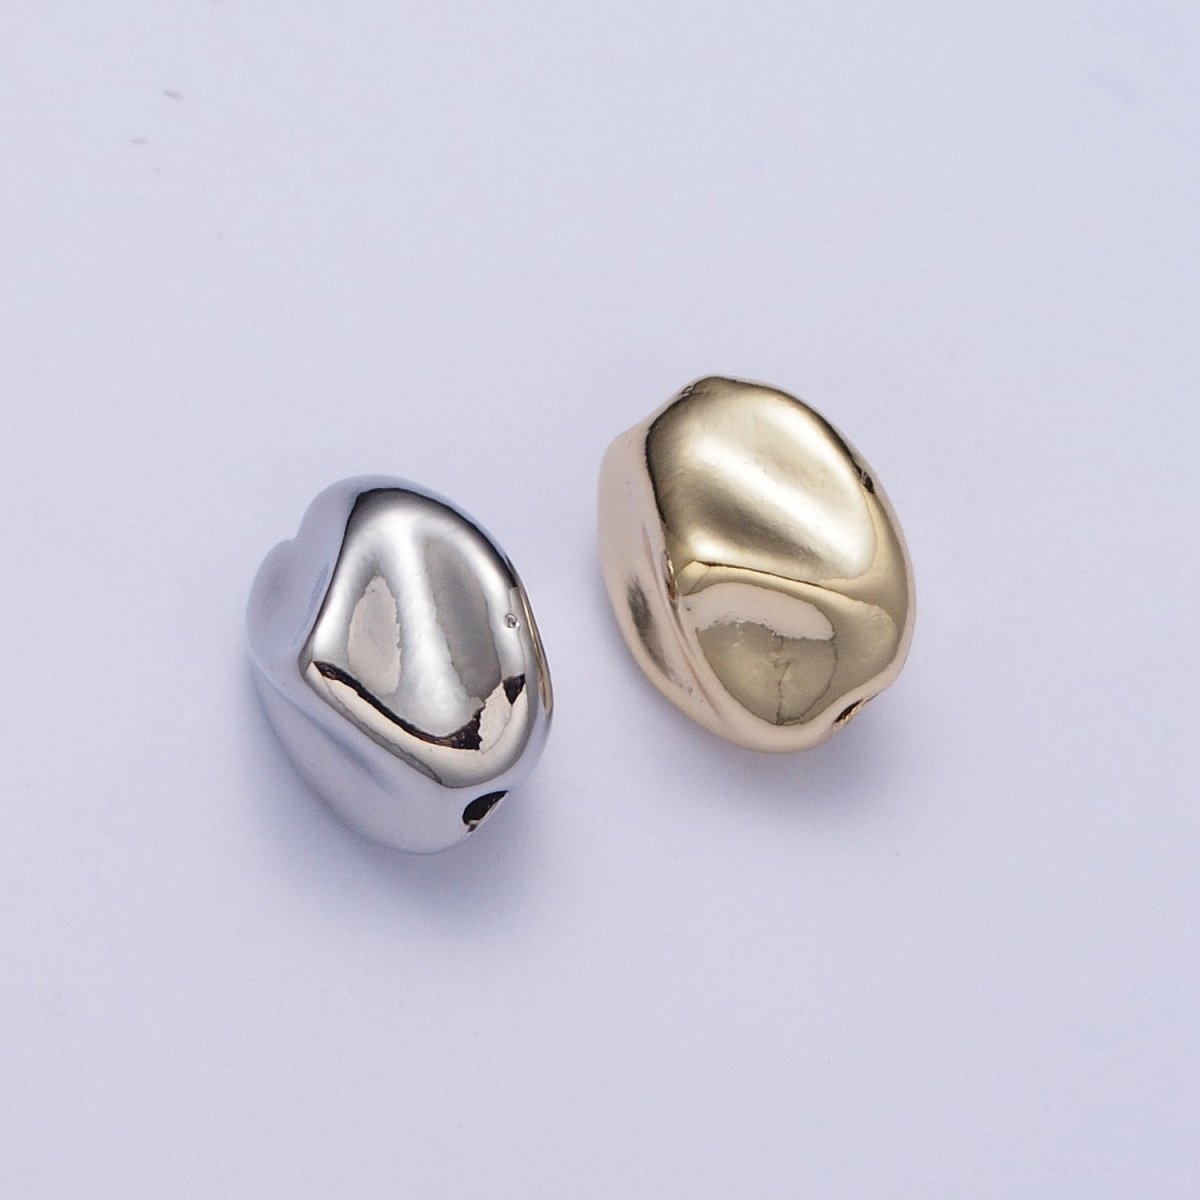 Abstract 10.7mmx9.2mm Gold & Silver Geometric Spacer Bead Supply For Jewelry Bracelet Making | W-928 W-929 - DLUXCA